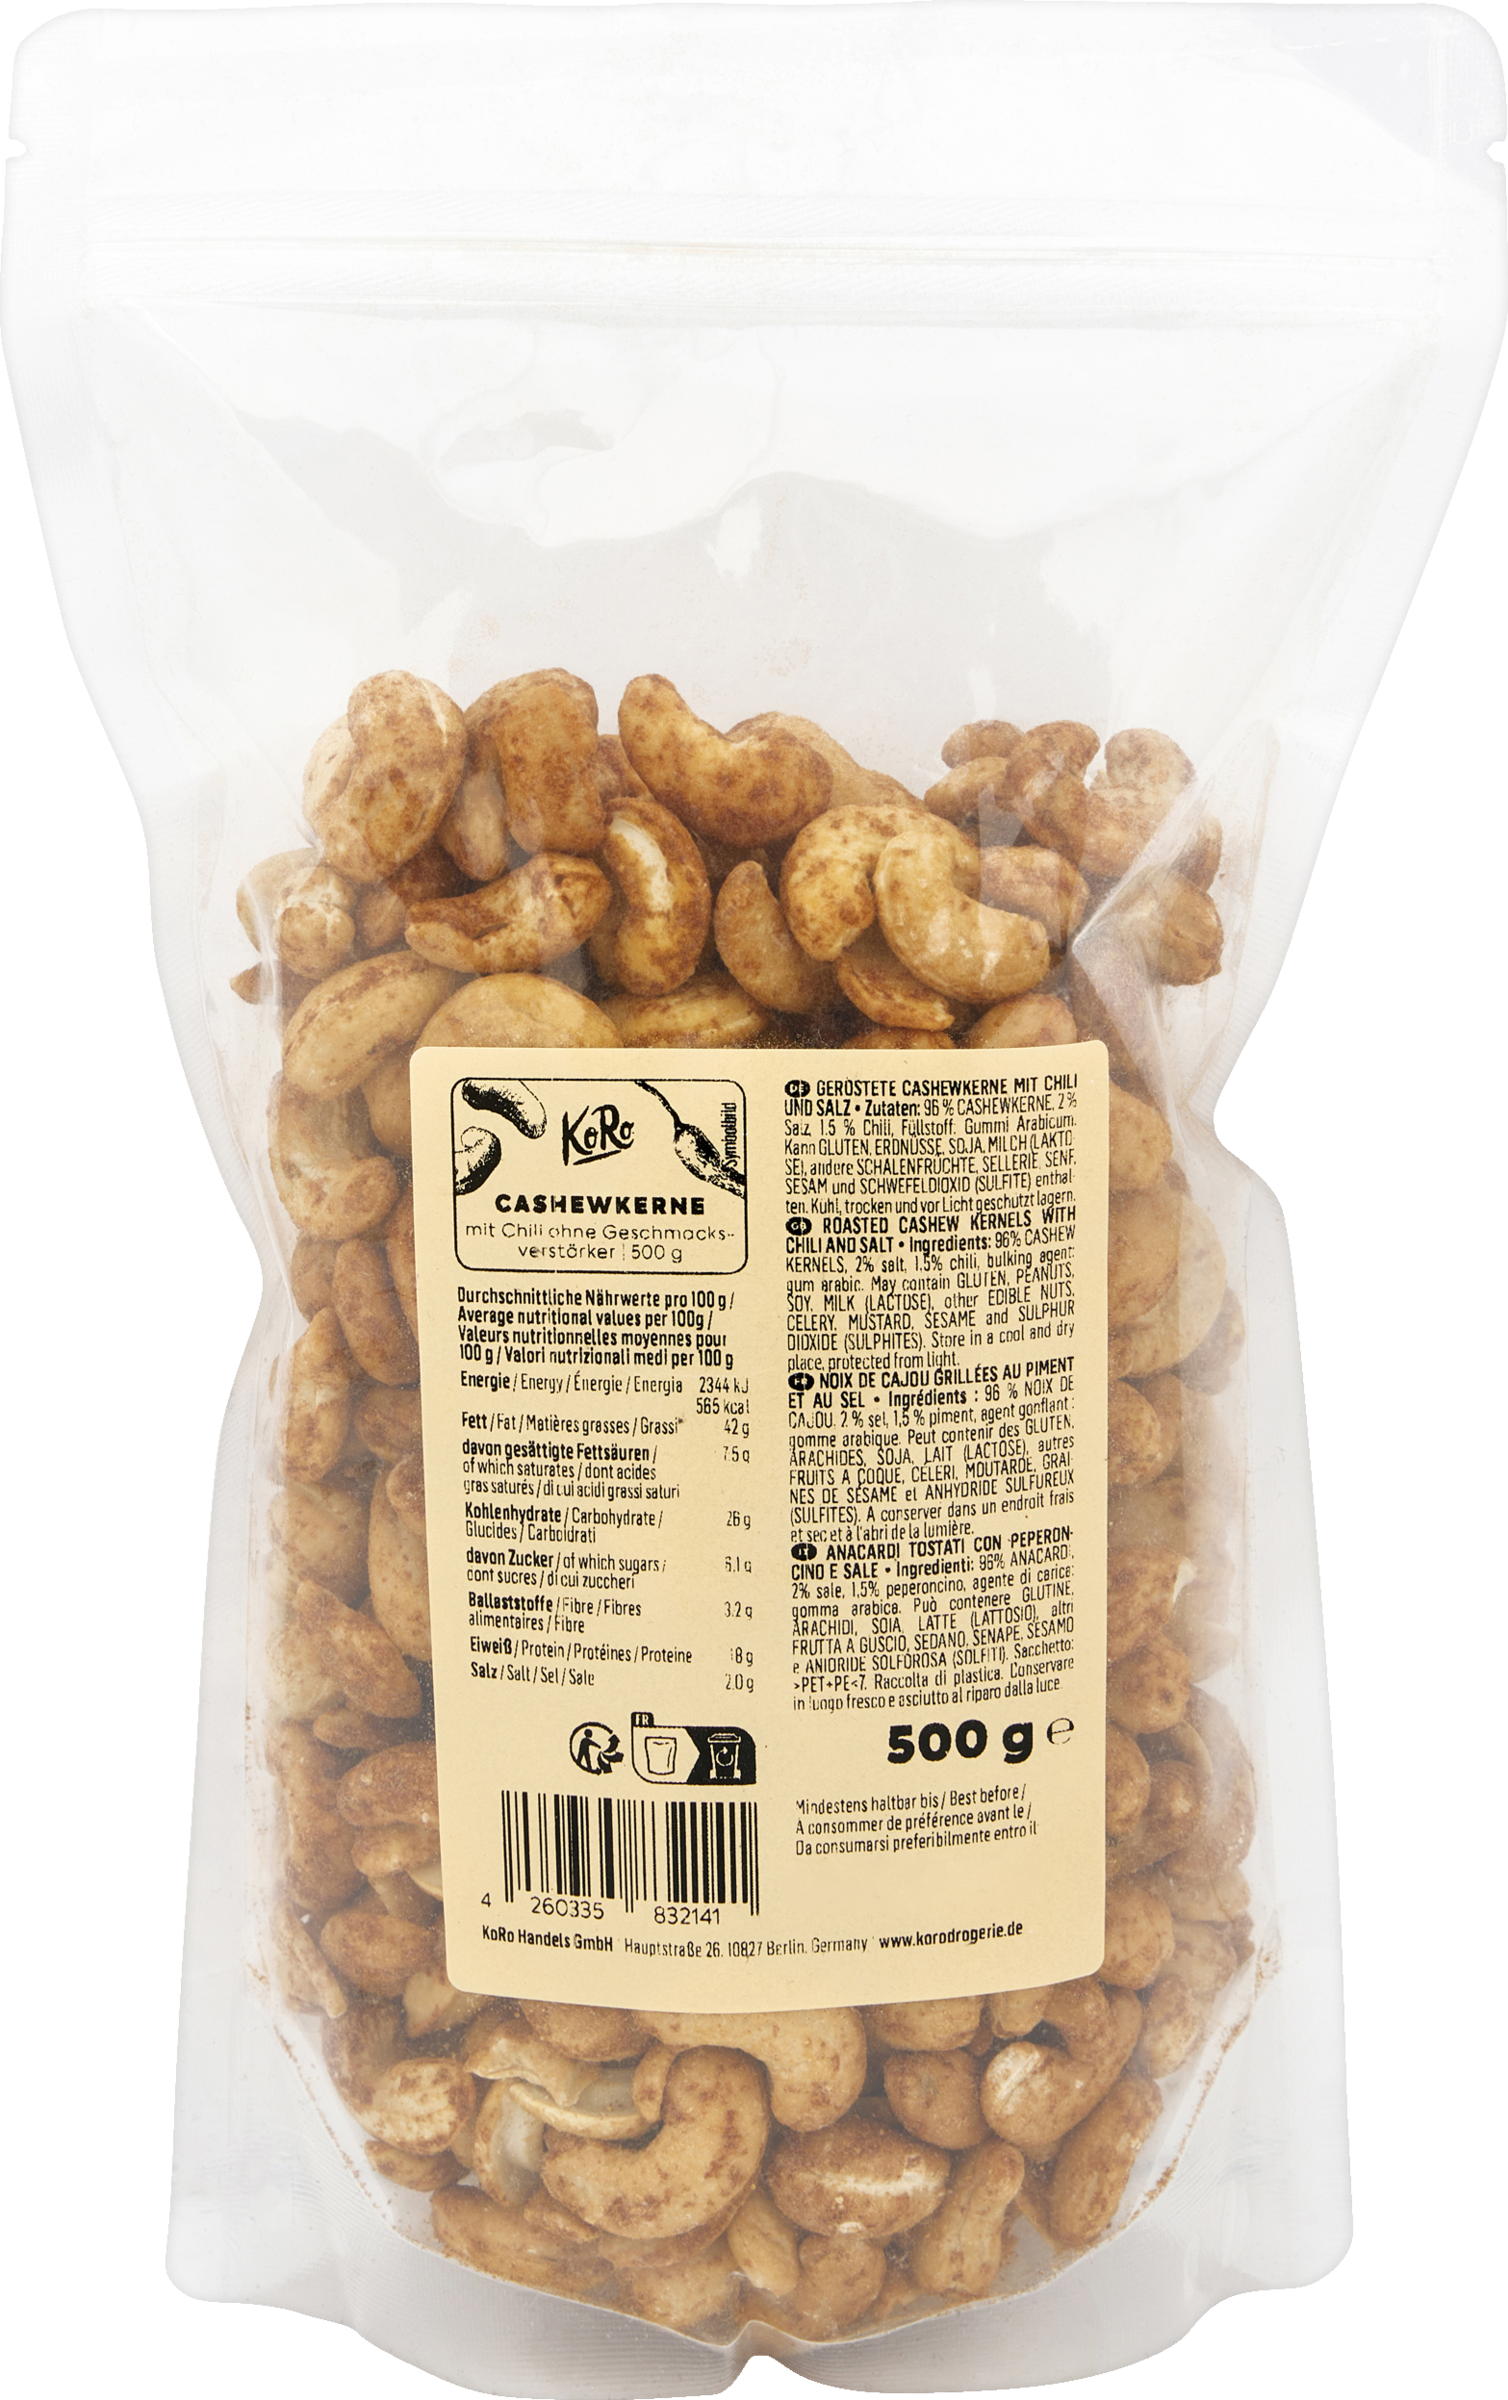 KoRo Cashew nuts with chili without flavor enhancers